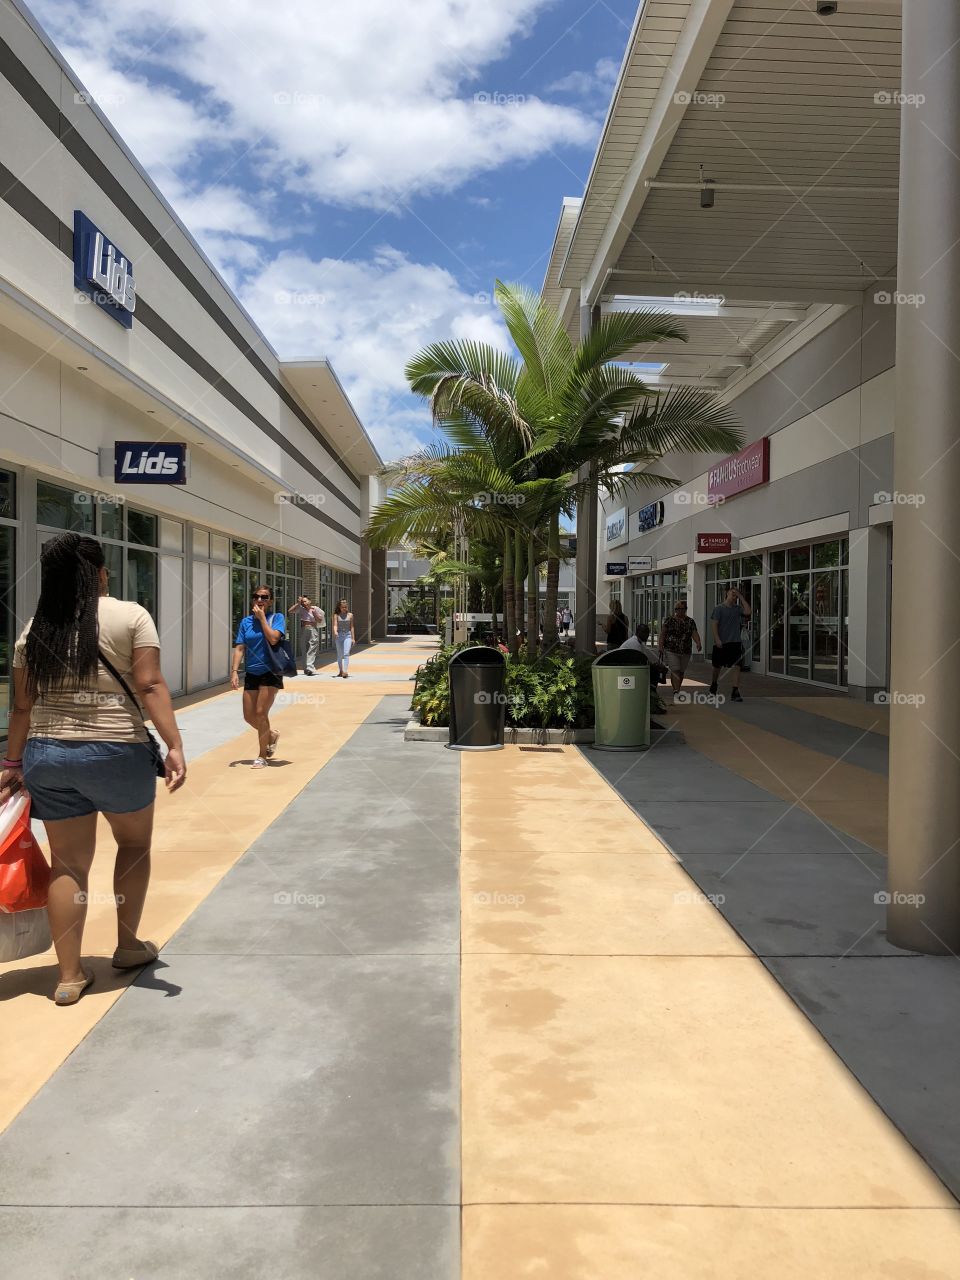 This is an outlet mall in the Daytona beach area in Florida. It was clear skies and sunny that day. Many people were walking around stopping at their favorite shops to try to get a good deal. Featured are the stores Lids and Famous Footwear.